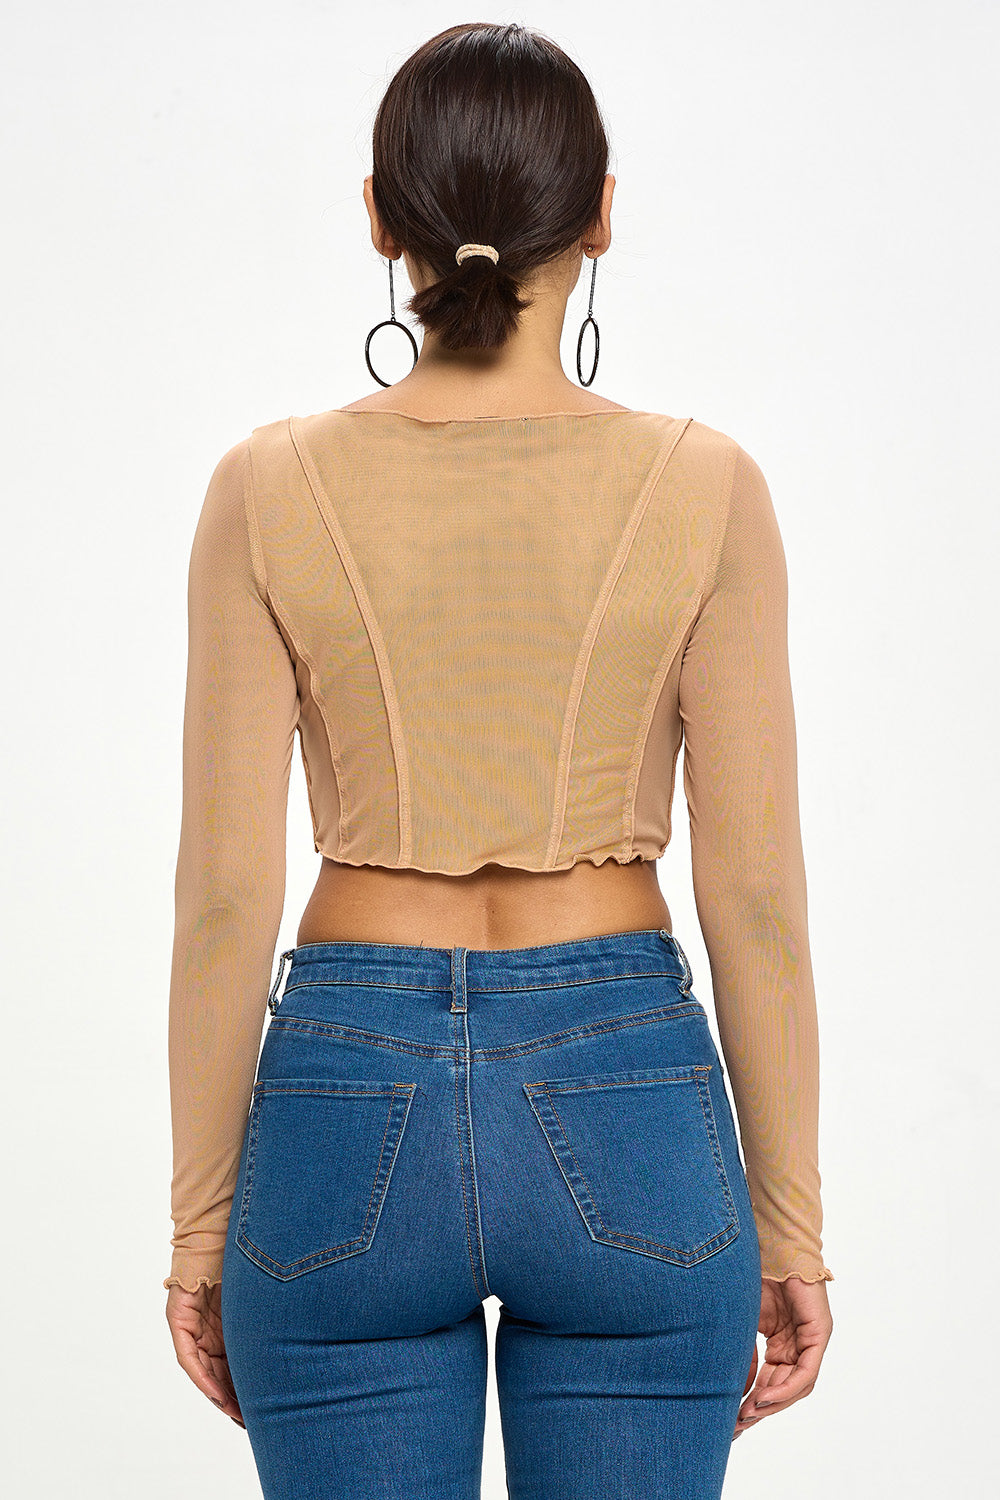 FRONT EYELET CLOSURE LACE UP BACK CORSET CROP TOP